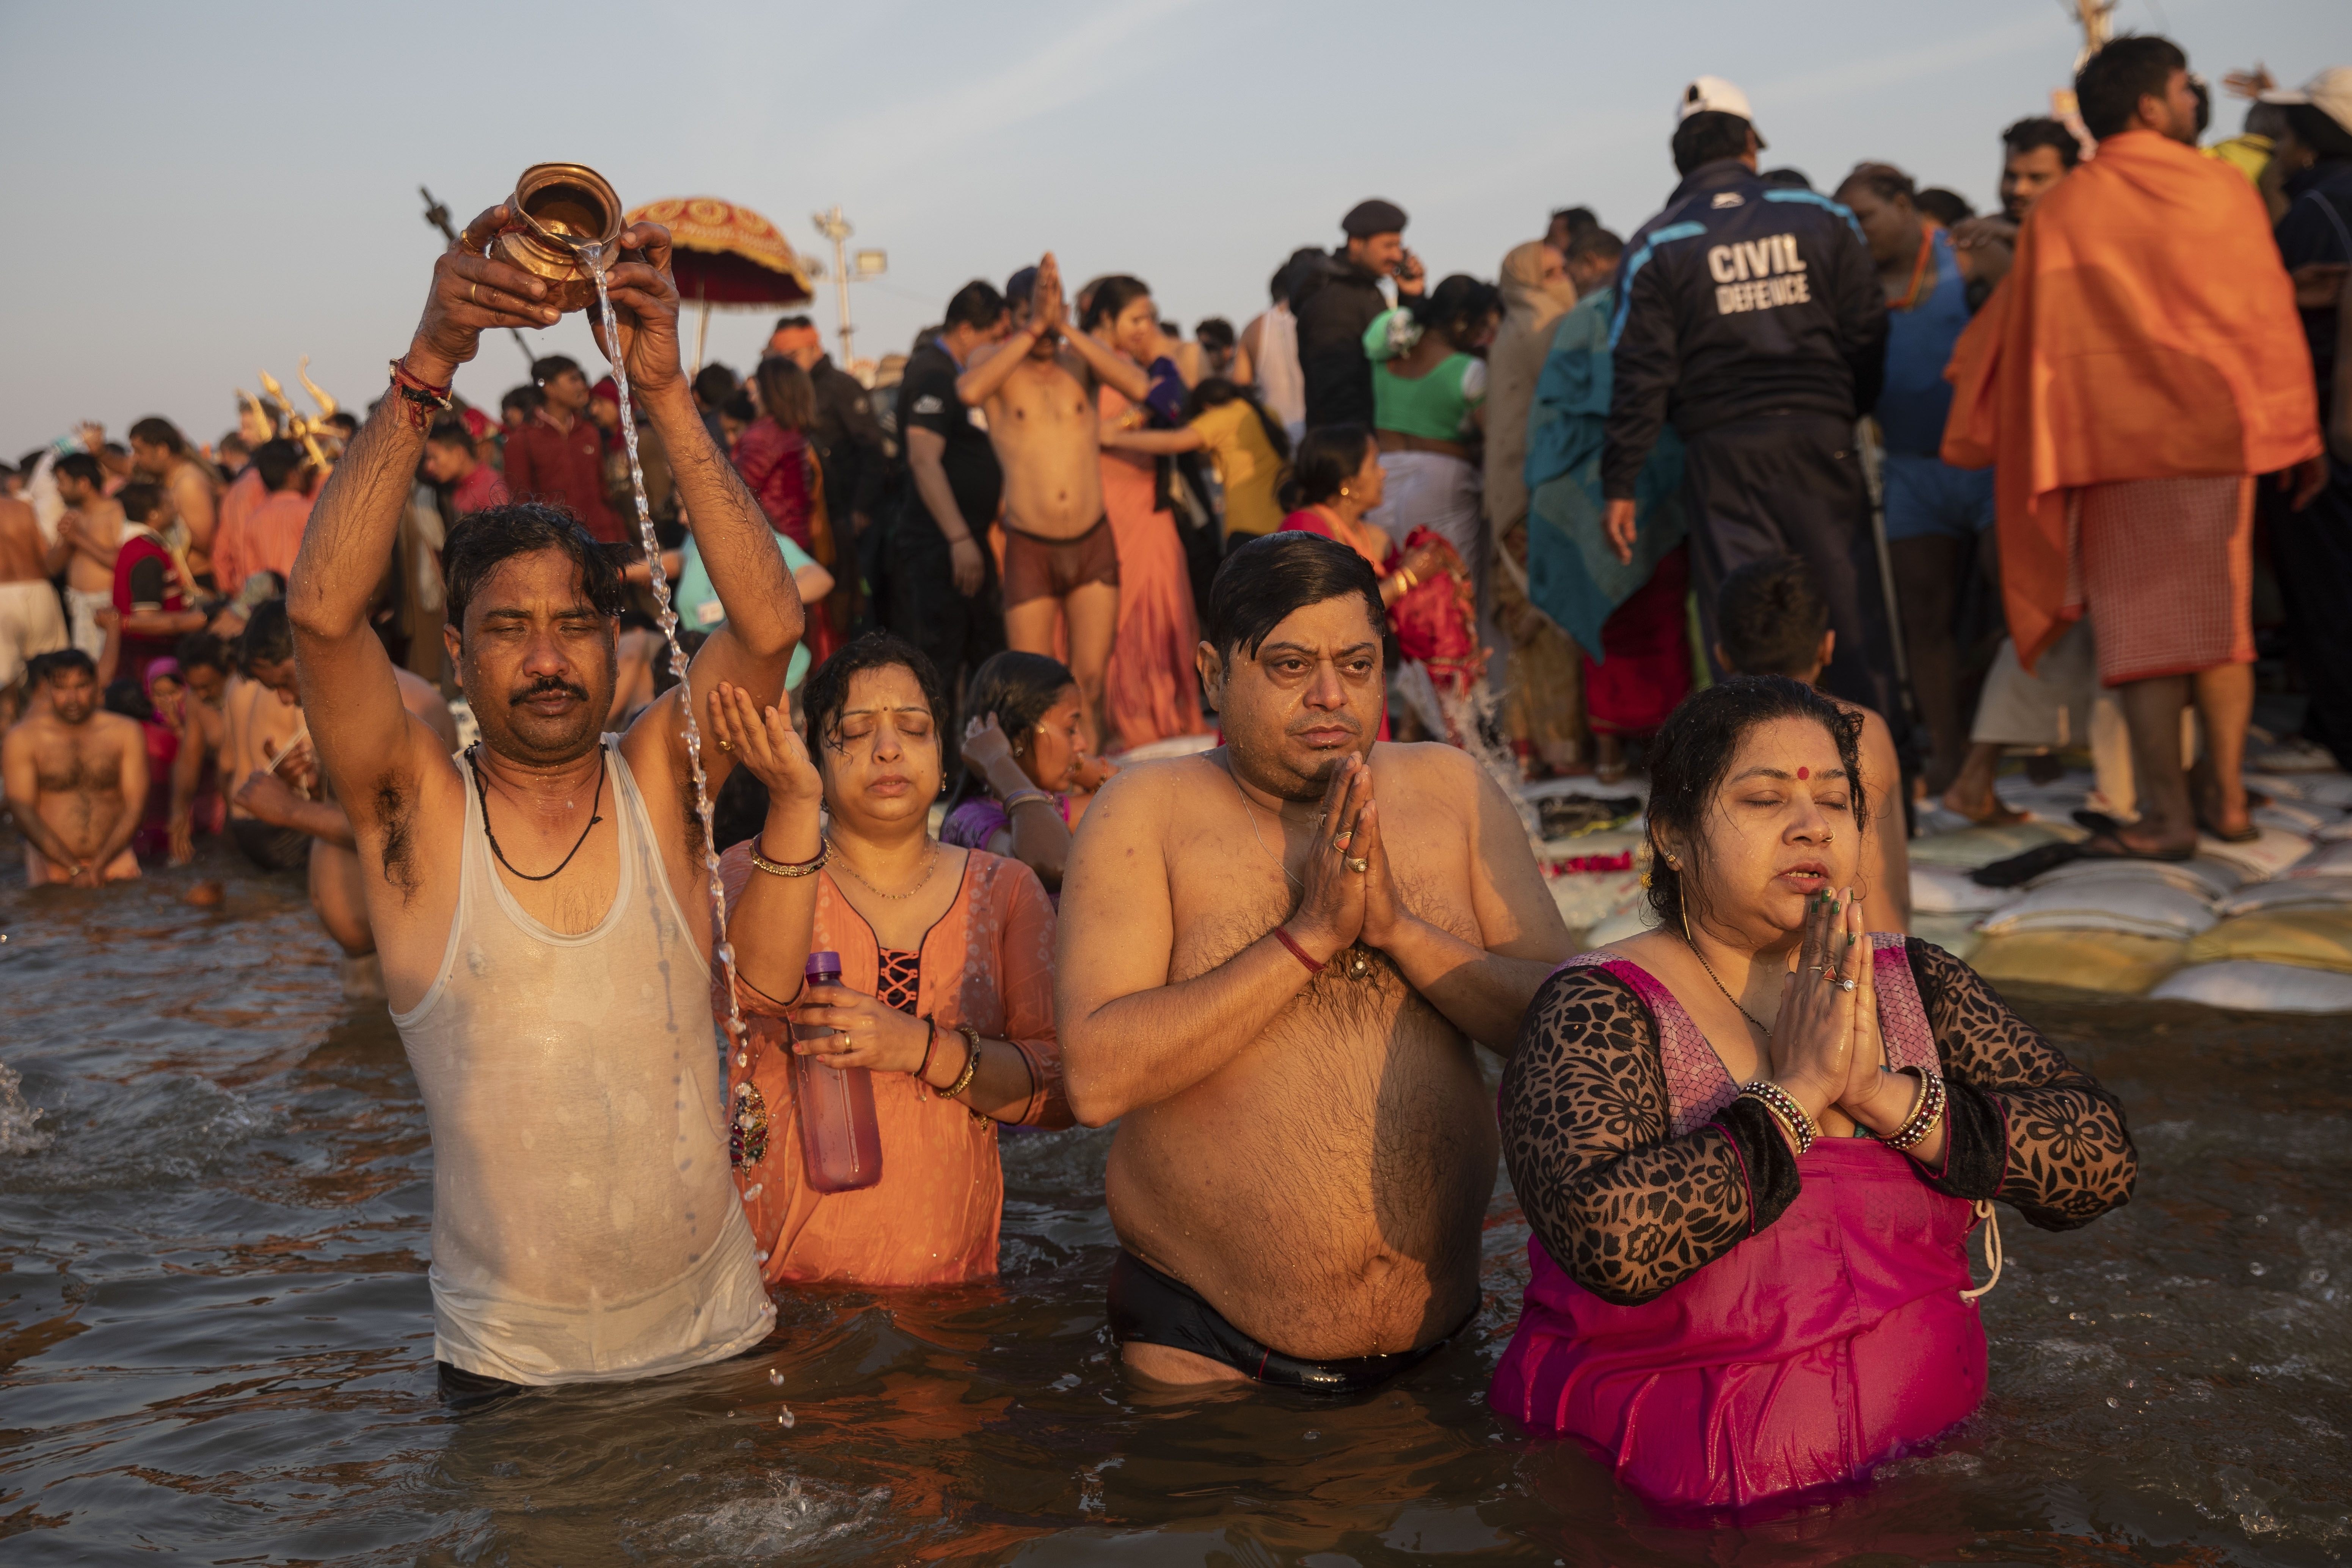 Hindu devotees take a dip on auspicious Makar Sankranti day during the Kumbh Mela, or pitcher festival in Prayagraj, Uttar Pradesh state, India, Tuesday, Jan.15, 2019. The Kumbh Mela is a series of ritual baths by Hindu holy men, and other pilgrims at the confluence of three sacred rivers the Yamuna, the Ganges and the mythical Saraswati that dates back to at least medieval times. The city's Mughal-era name Allahabad was recently changed to Prayagraj. (AP Photo/Bernat Armangue)